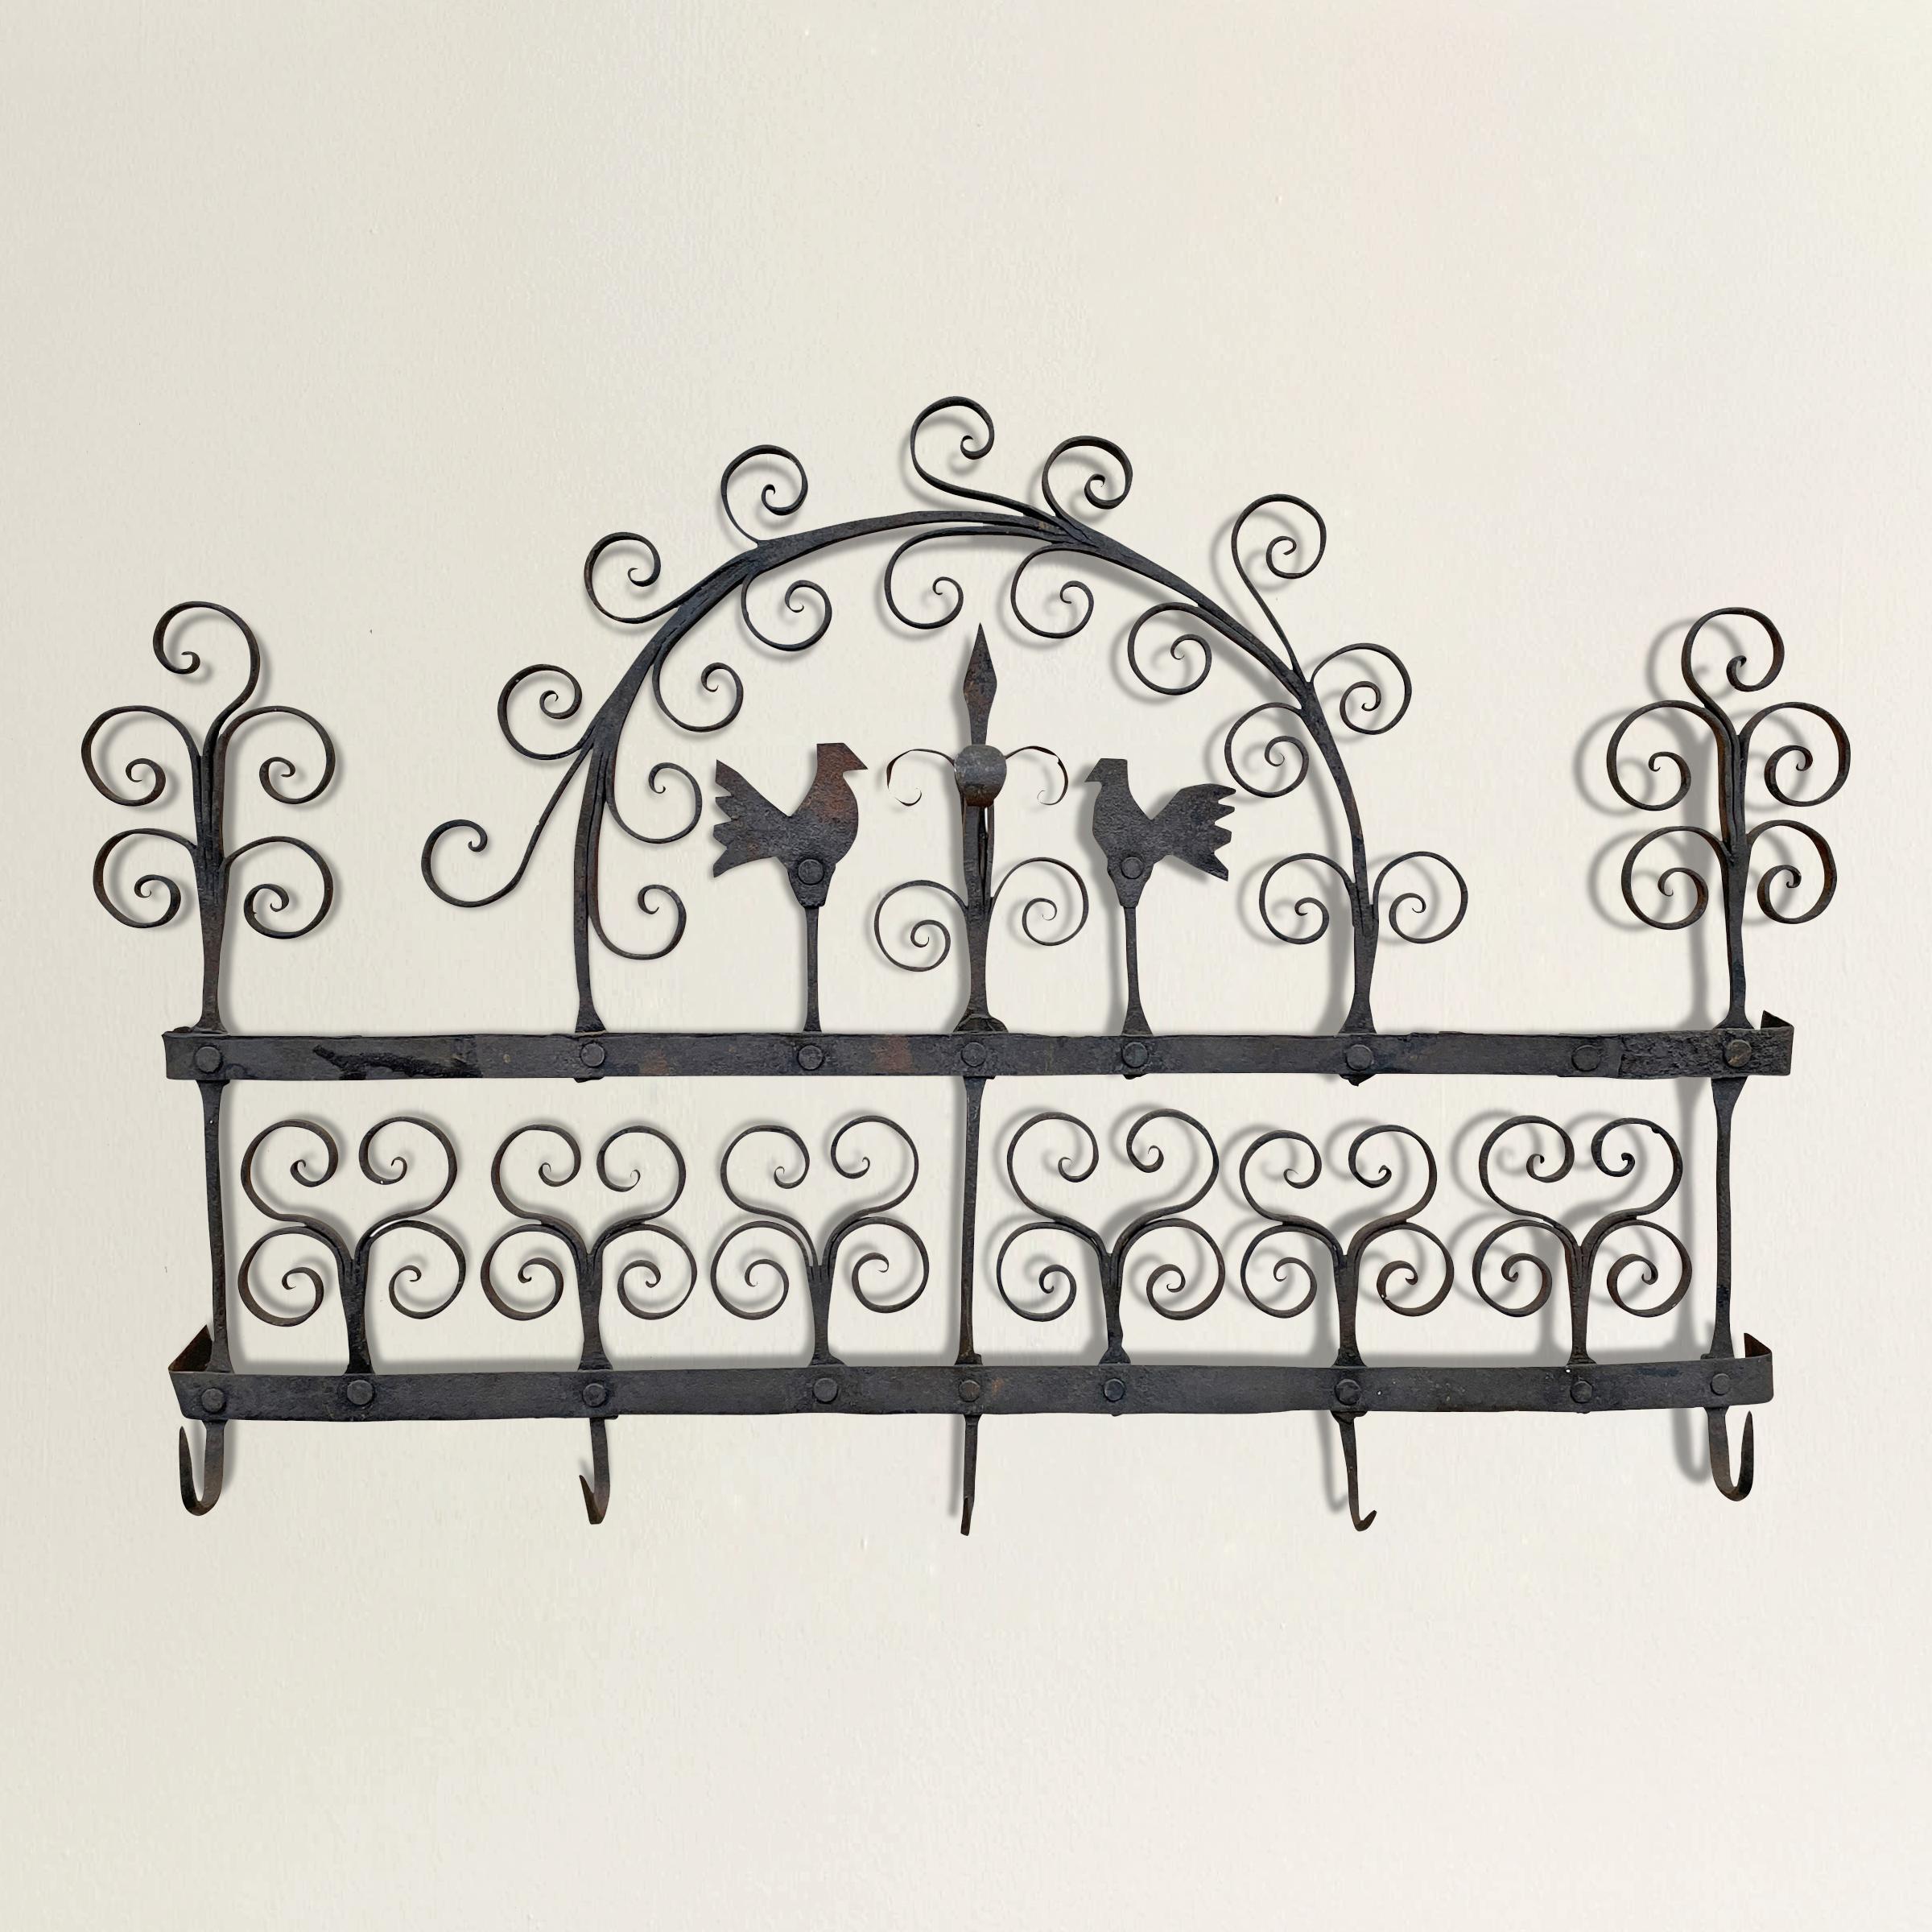 A charming 18th century hand-wrought iron kitchen rack with five hooks originally used for hanging spoons and other utensils near the hearth, and with two chickens and many wonderfully wrought curled stylized floral elements. We've had a custom